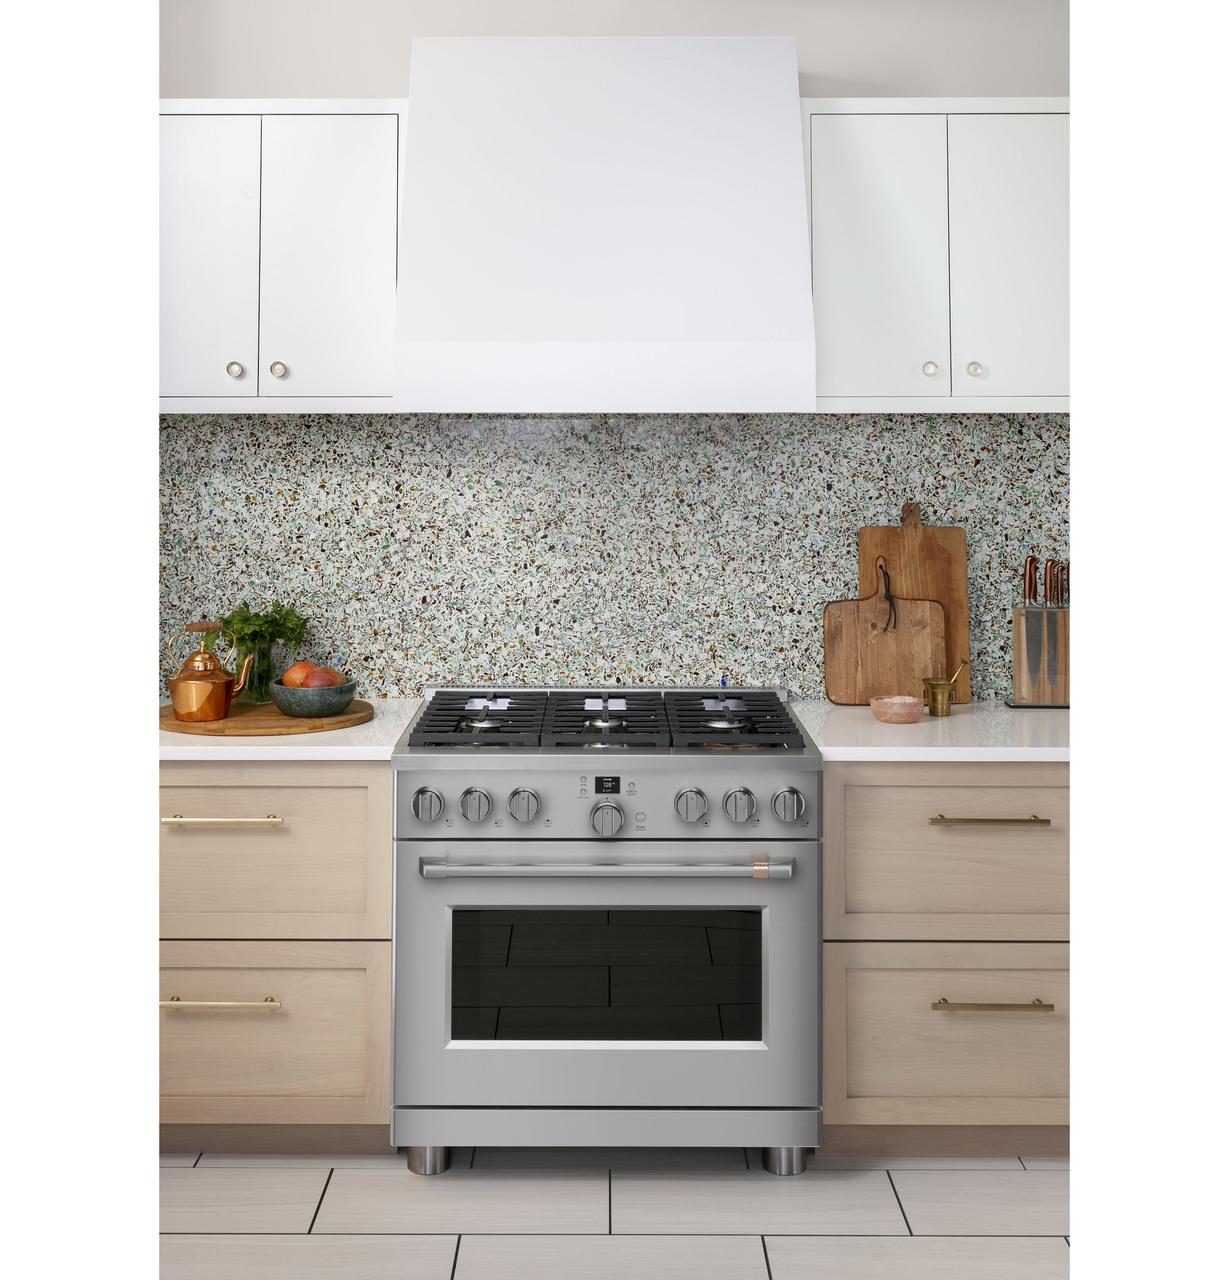 Cafe Caf(eback)™ 36" Smart All-Gas Commercial-Style Range with 6 Burners (Natural Gas)